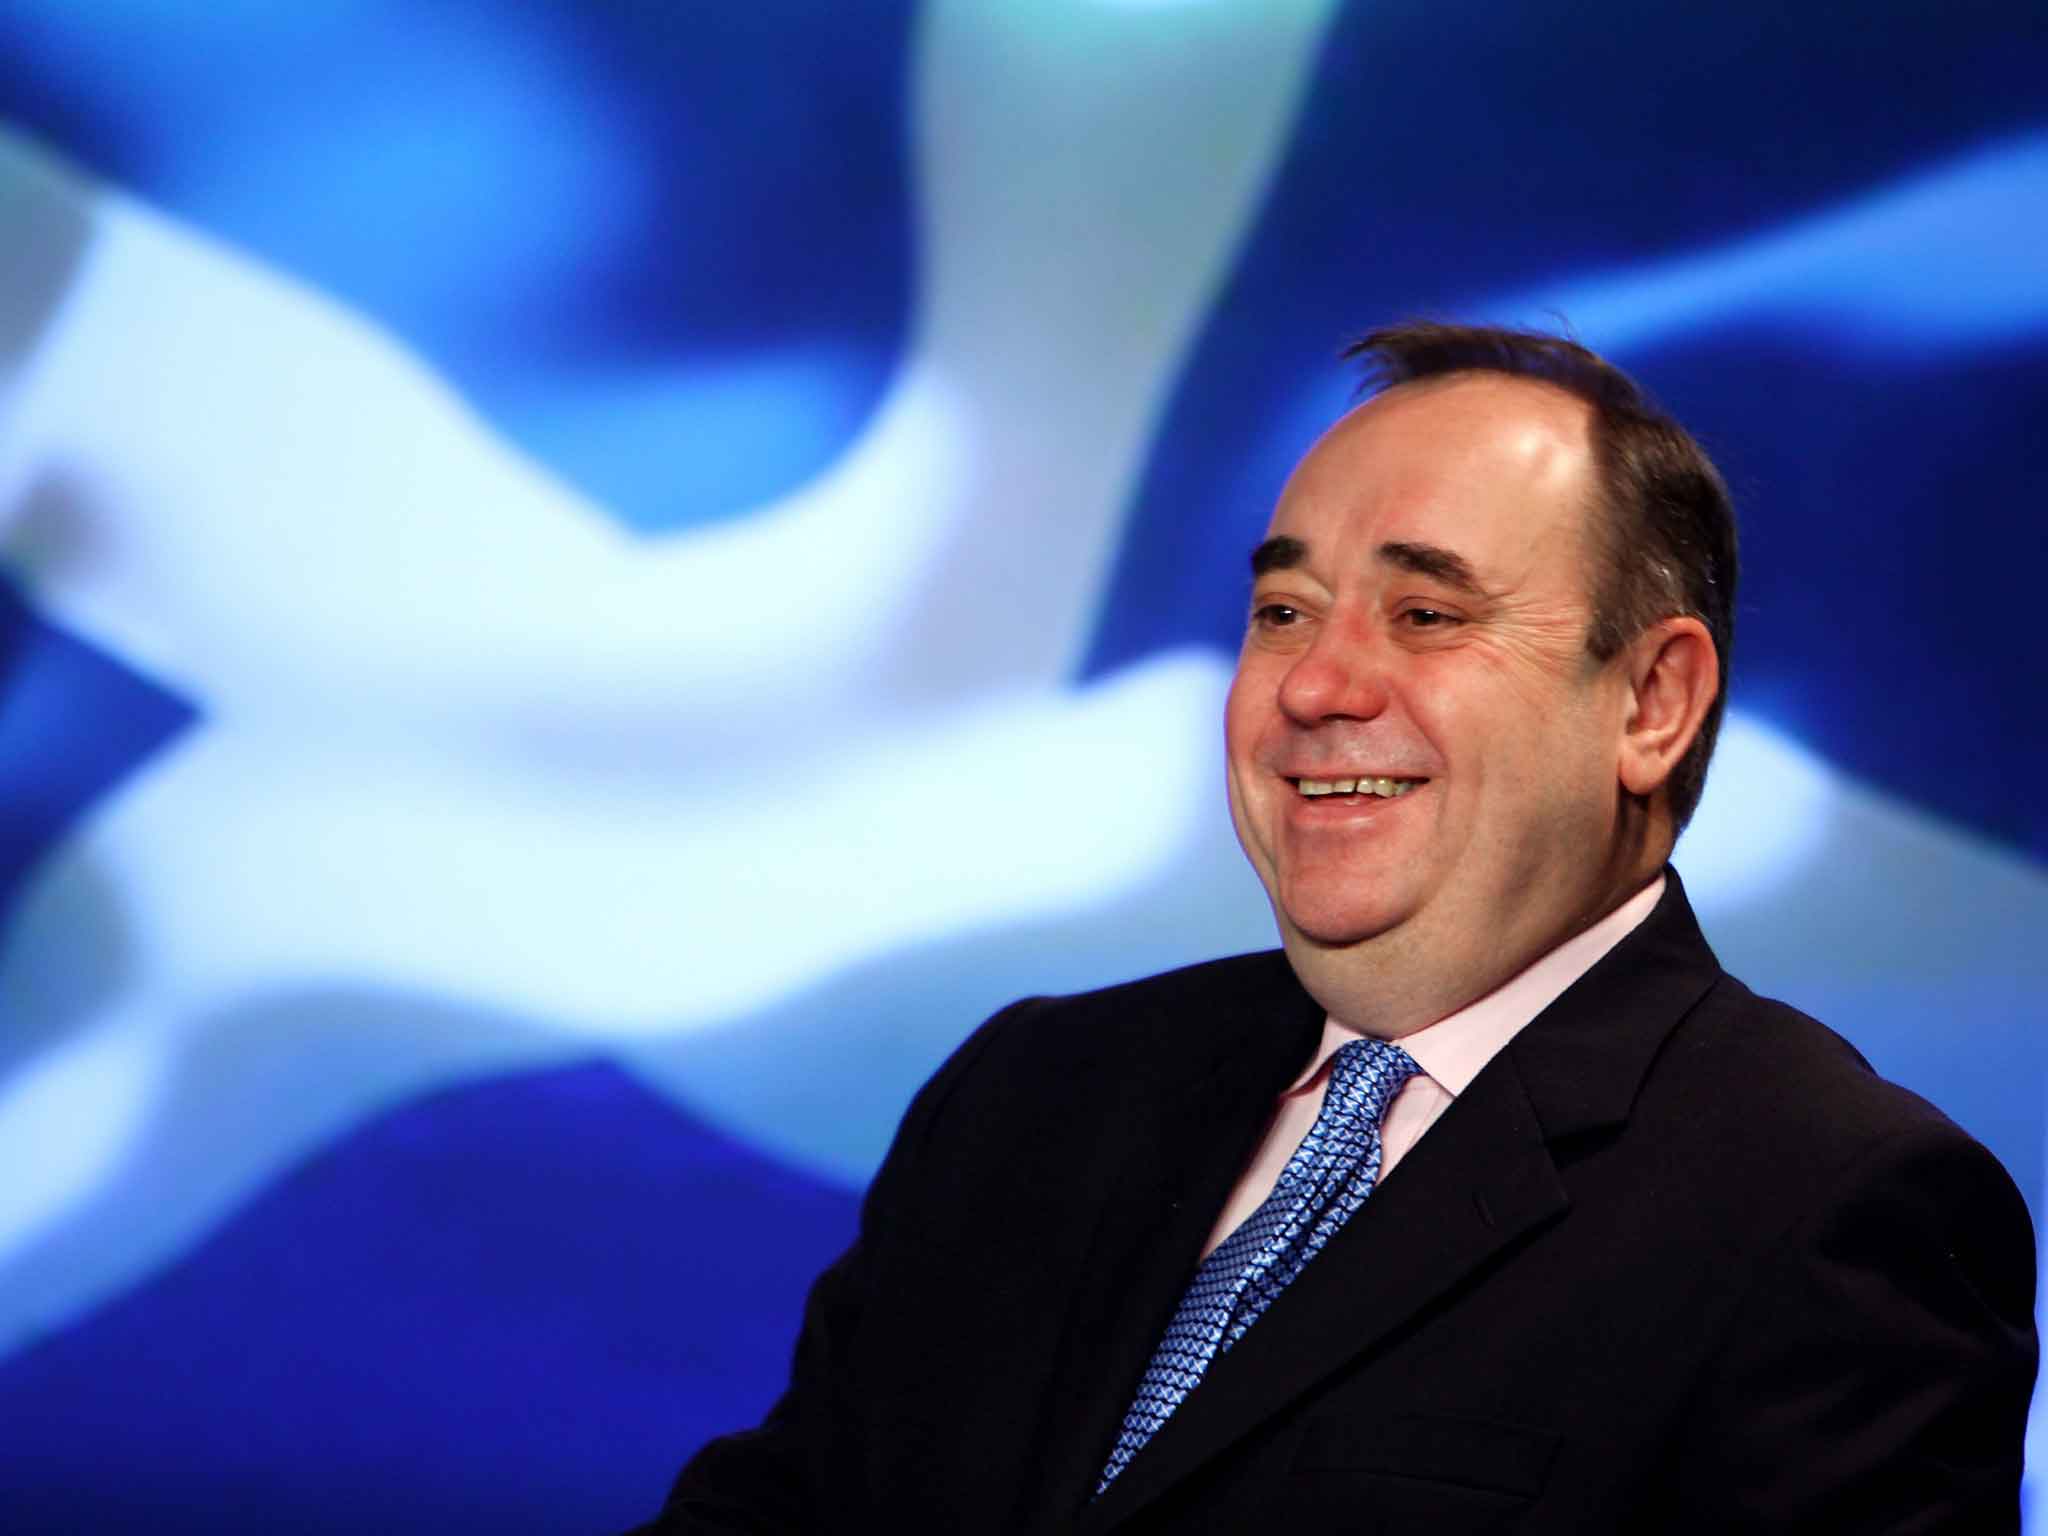 Alex Salmond said his earlier view had been 'overtaken by events'